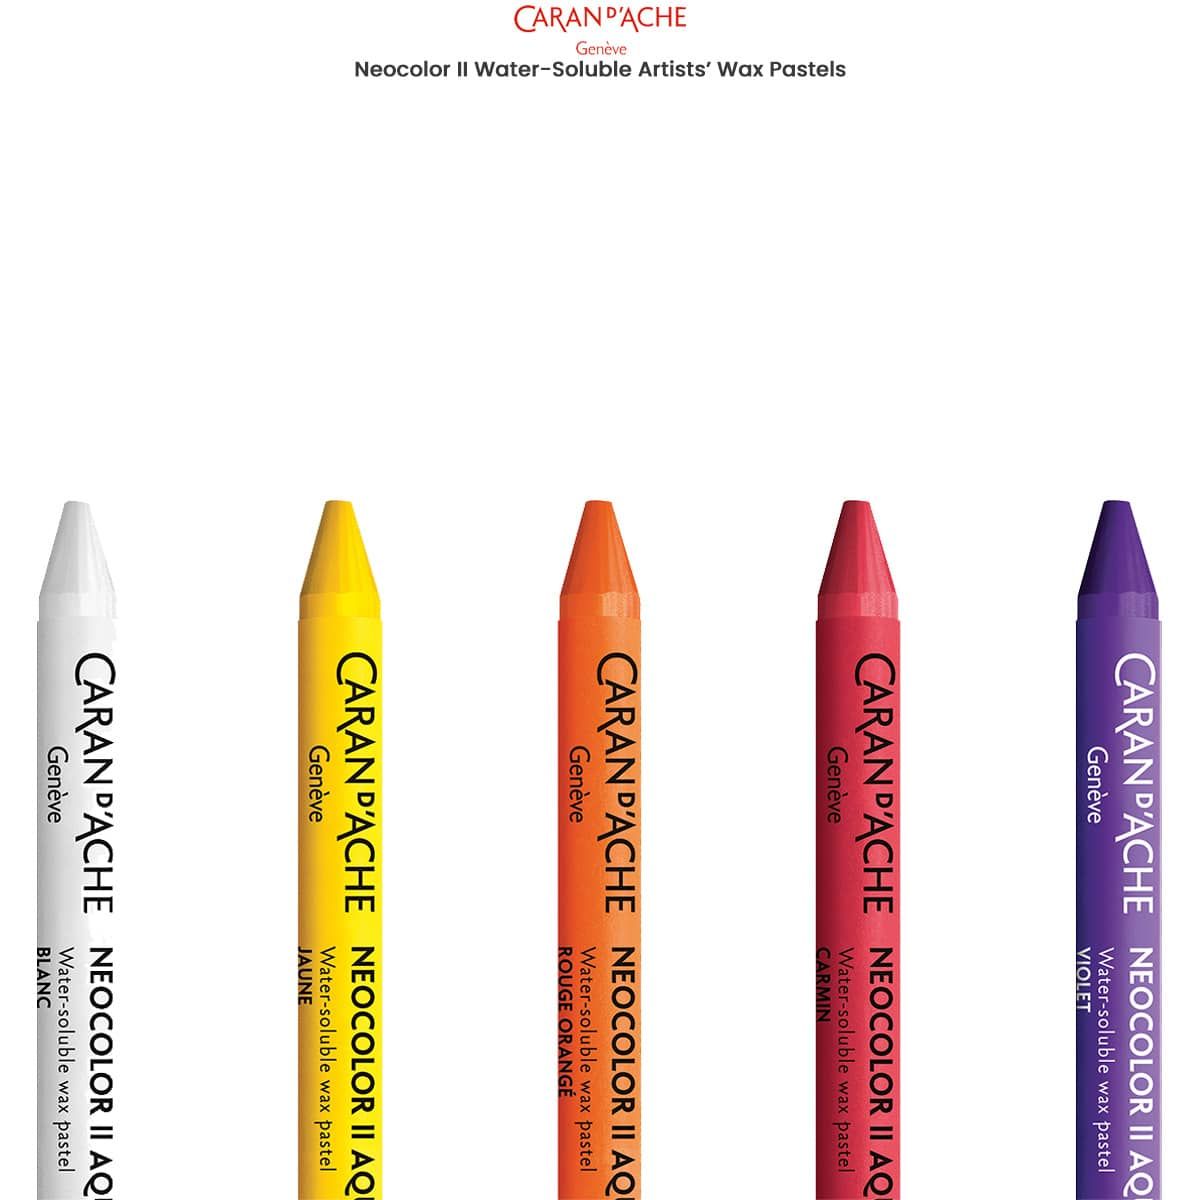 Caran D'Ache Classic Neocolor II Water-Soluble Crayons, 10 Assorted Colors